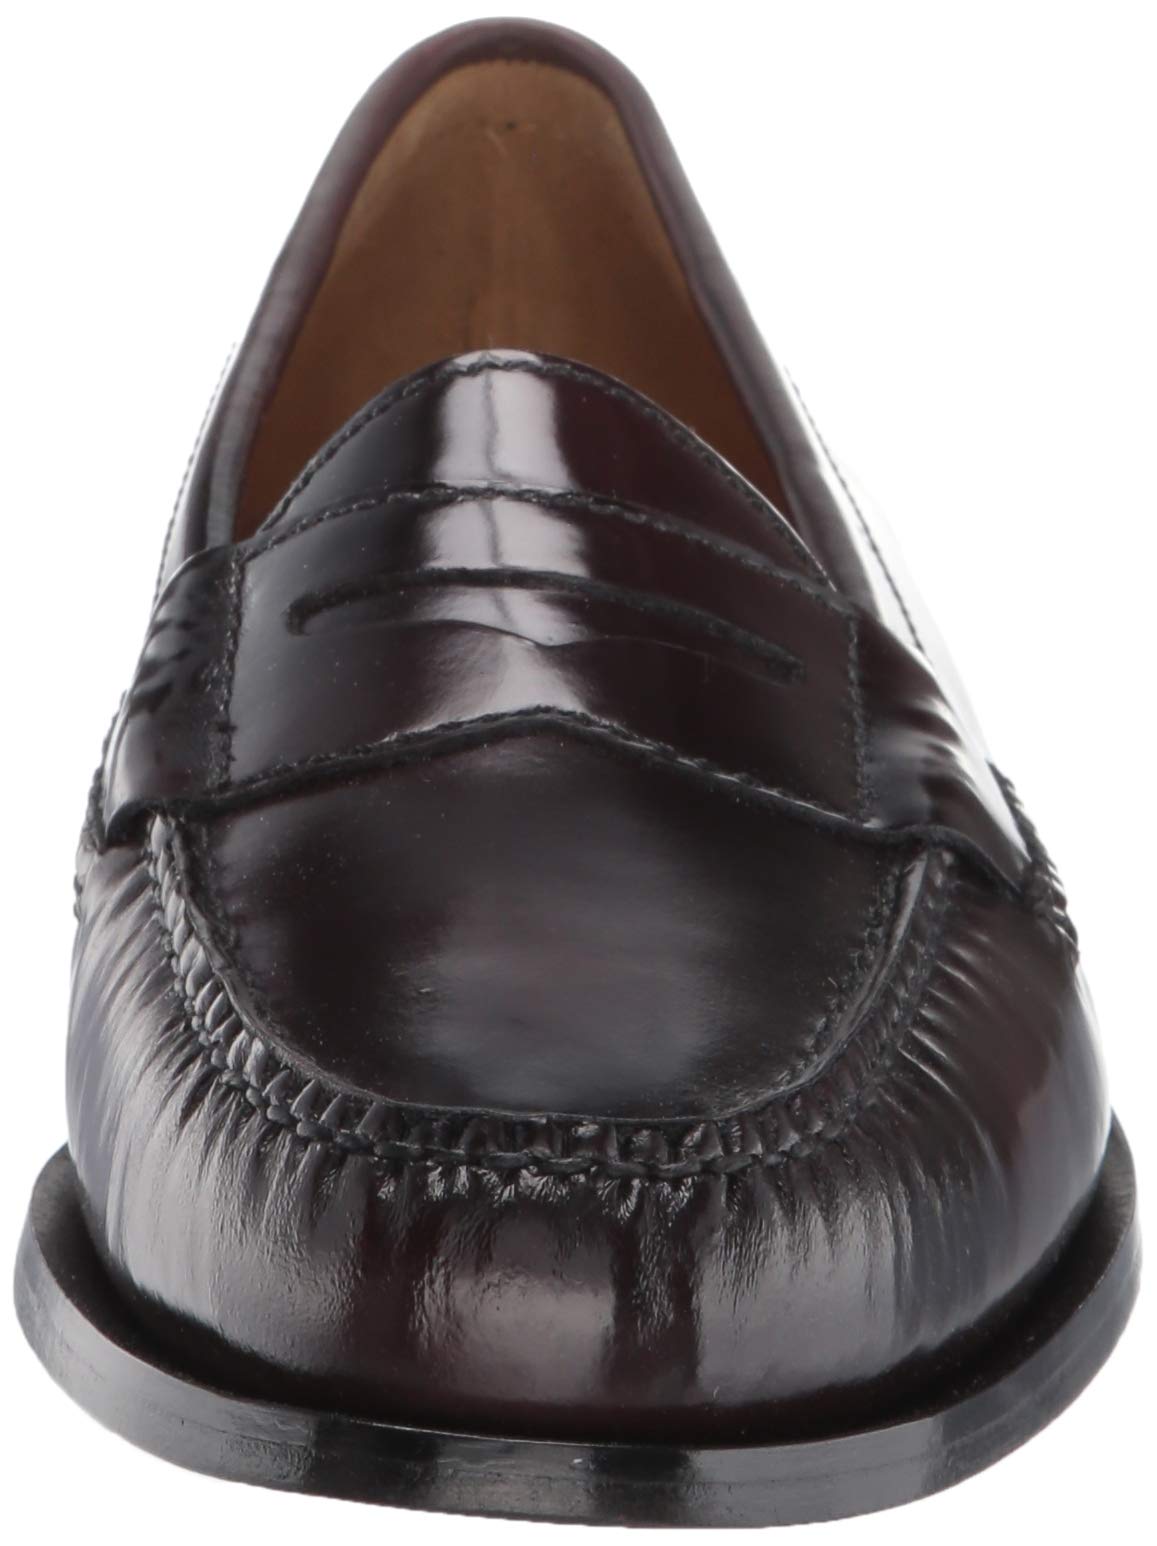 Cole Haan Men's Pinch Penny Slip-On Loafer